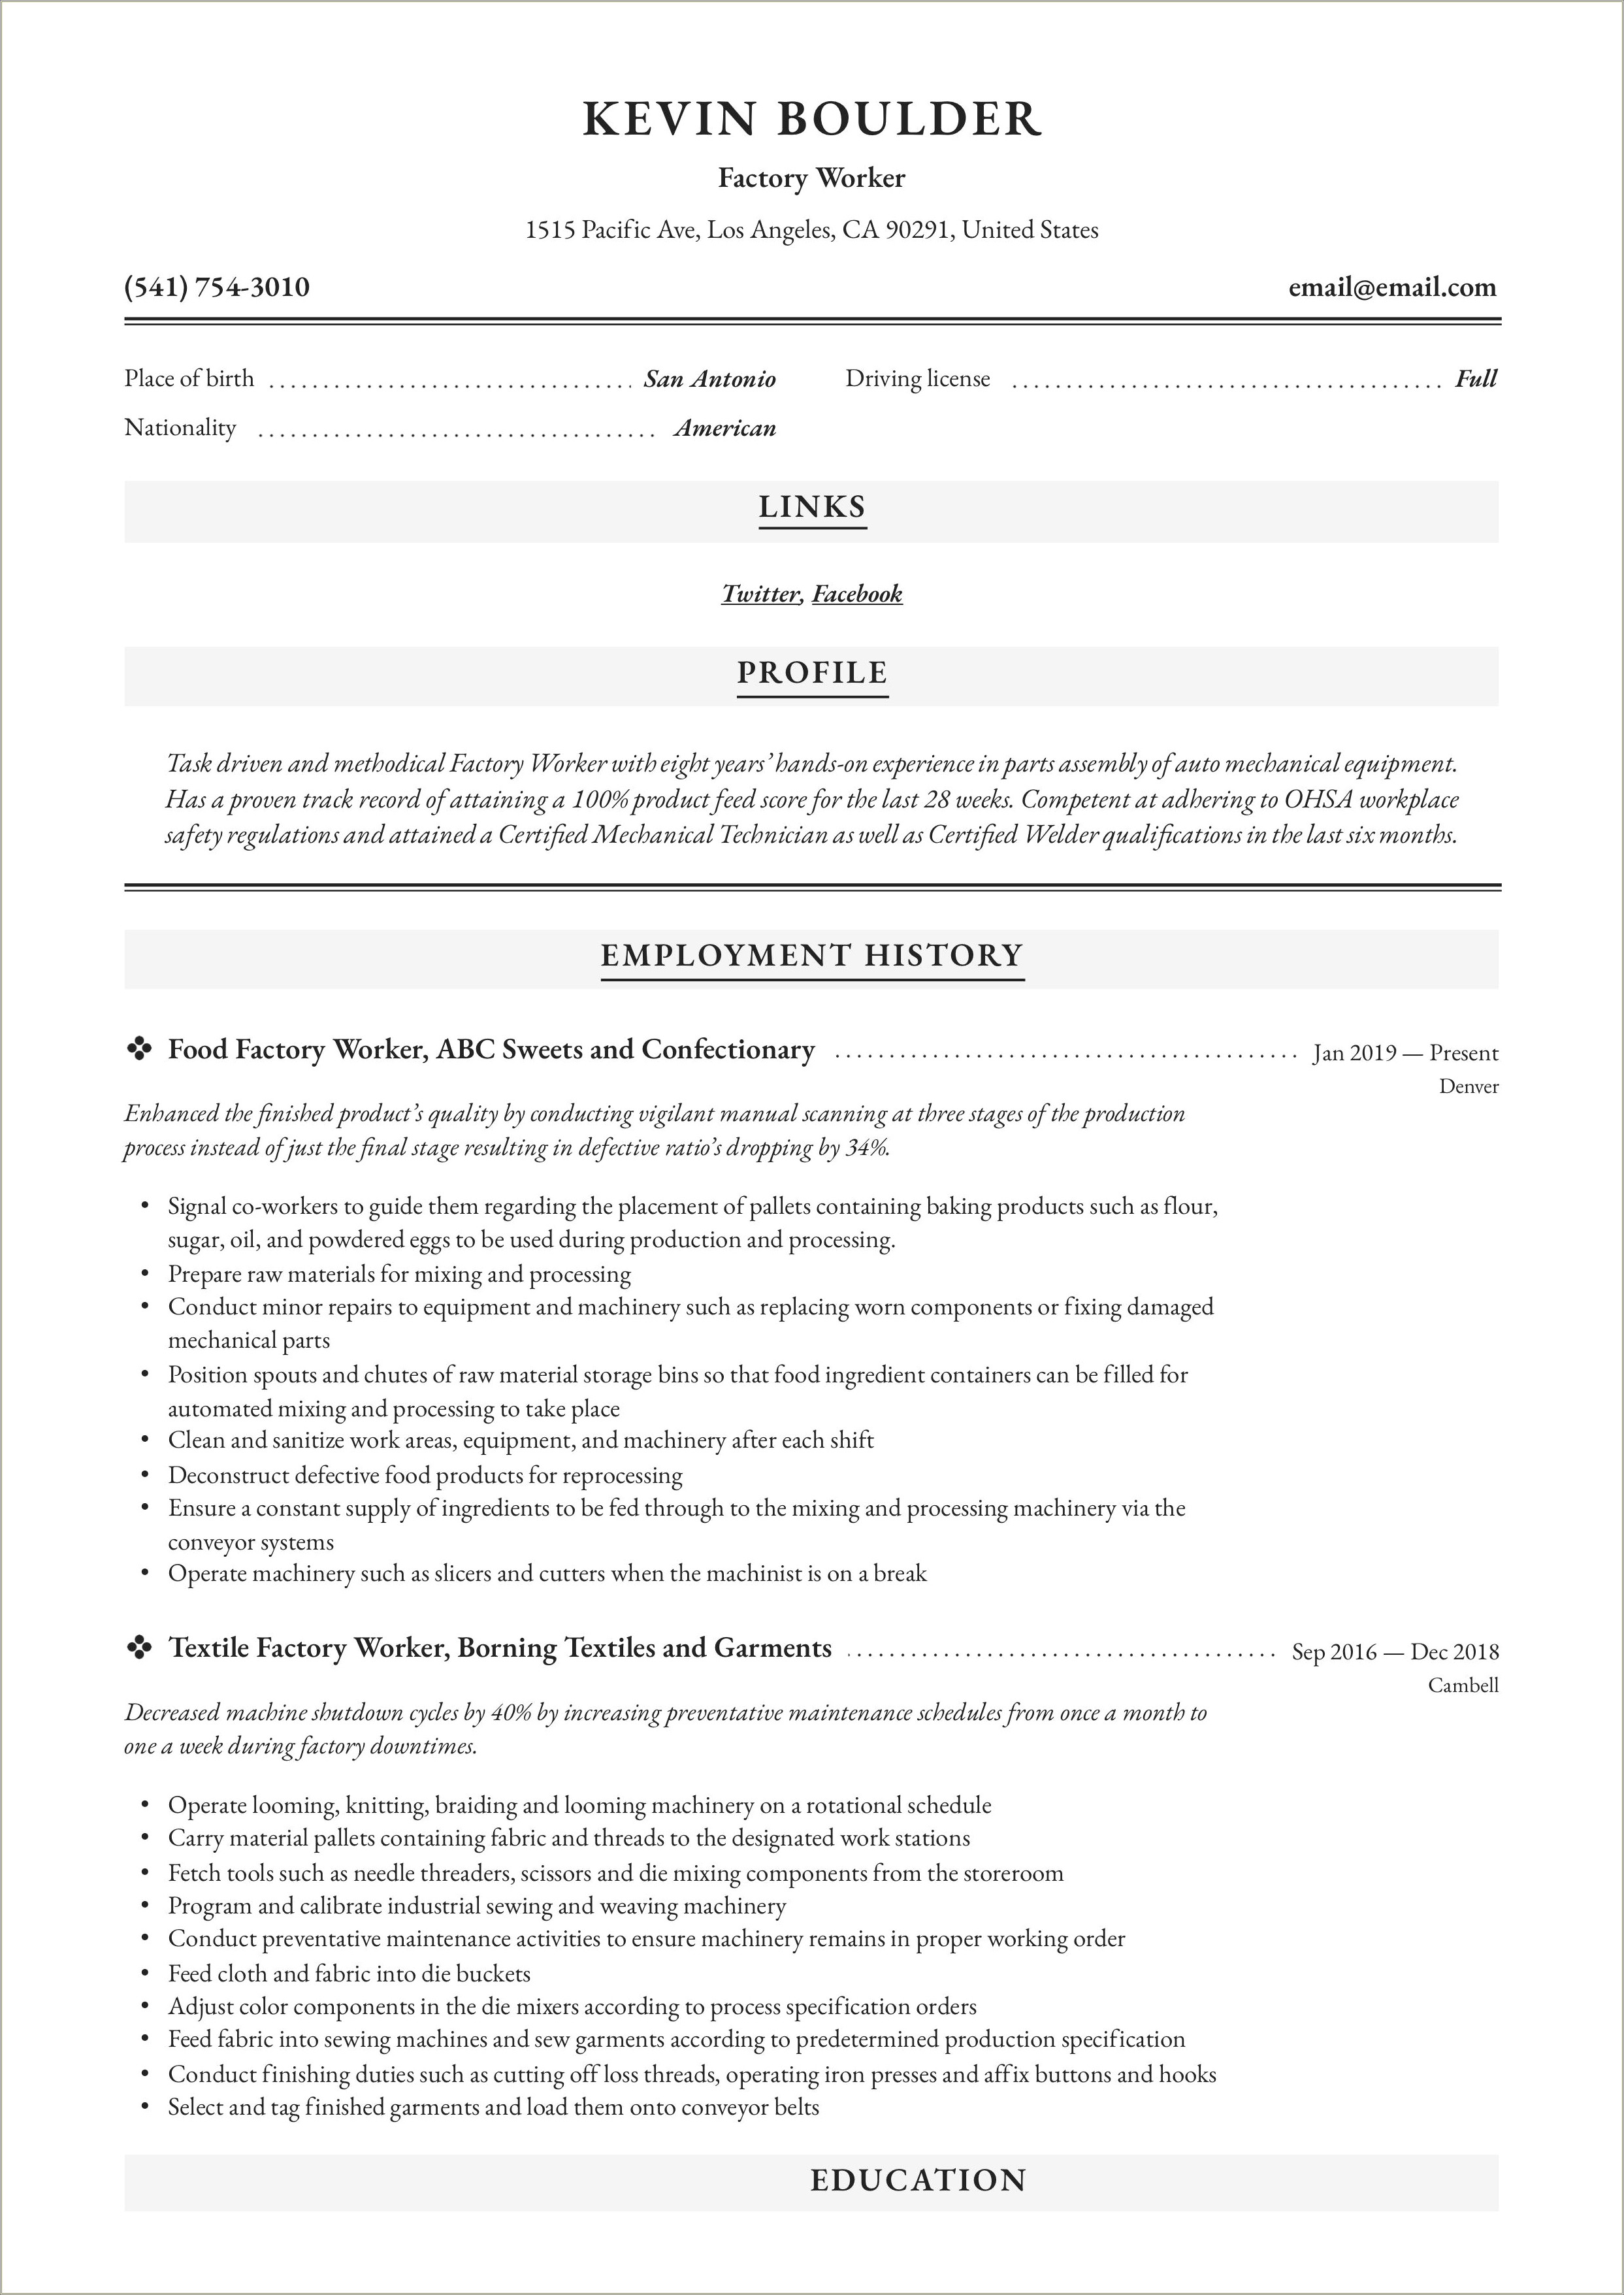 Resume Skills For Plant Worker Cutter